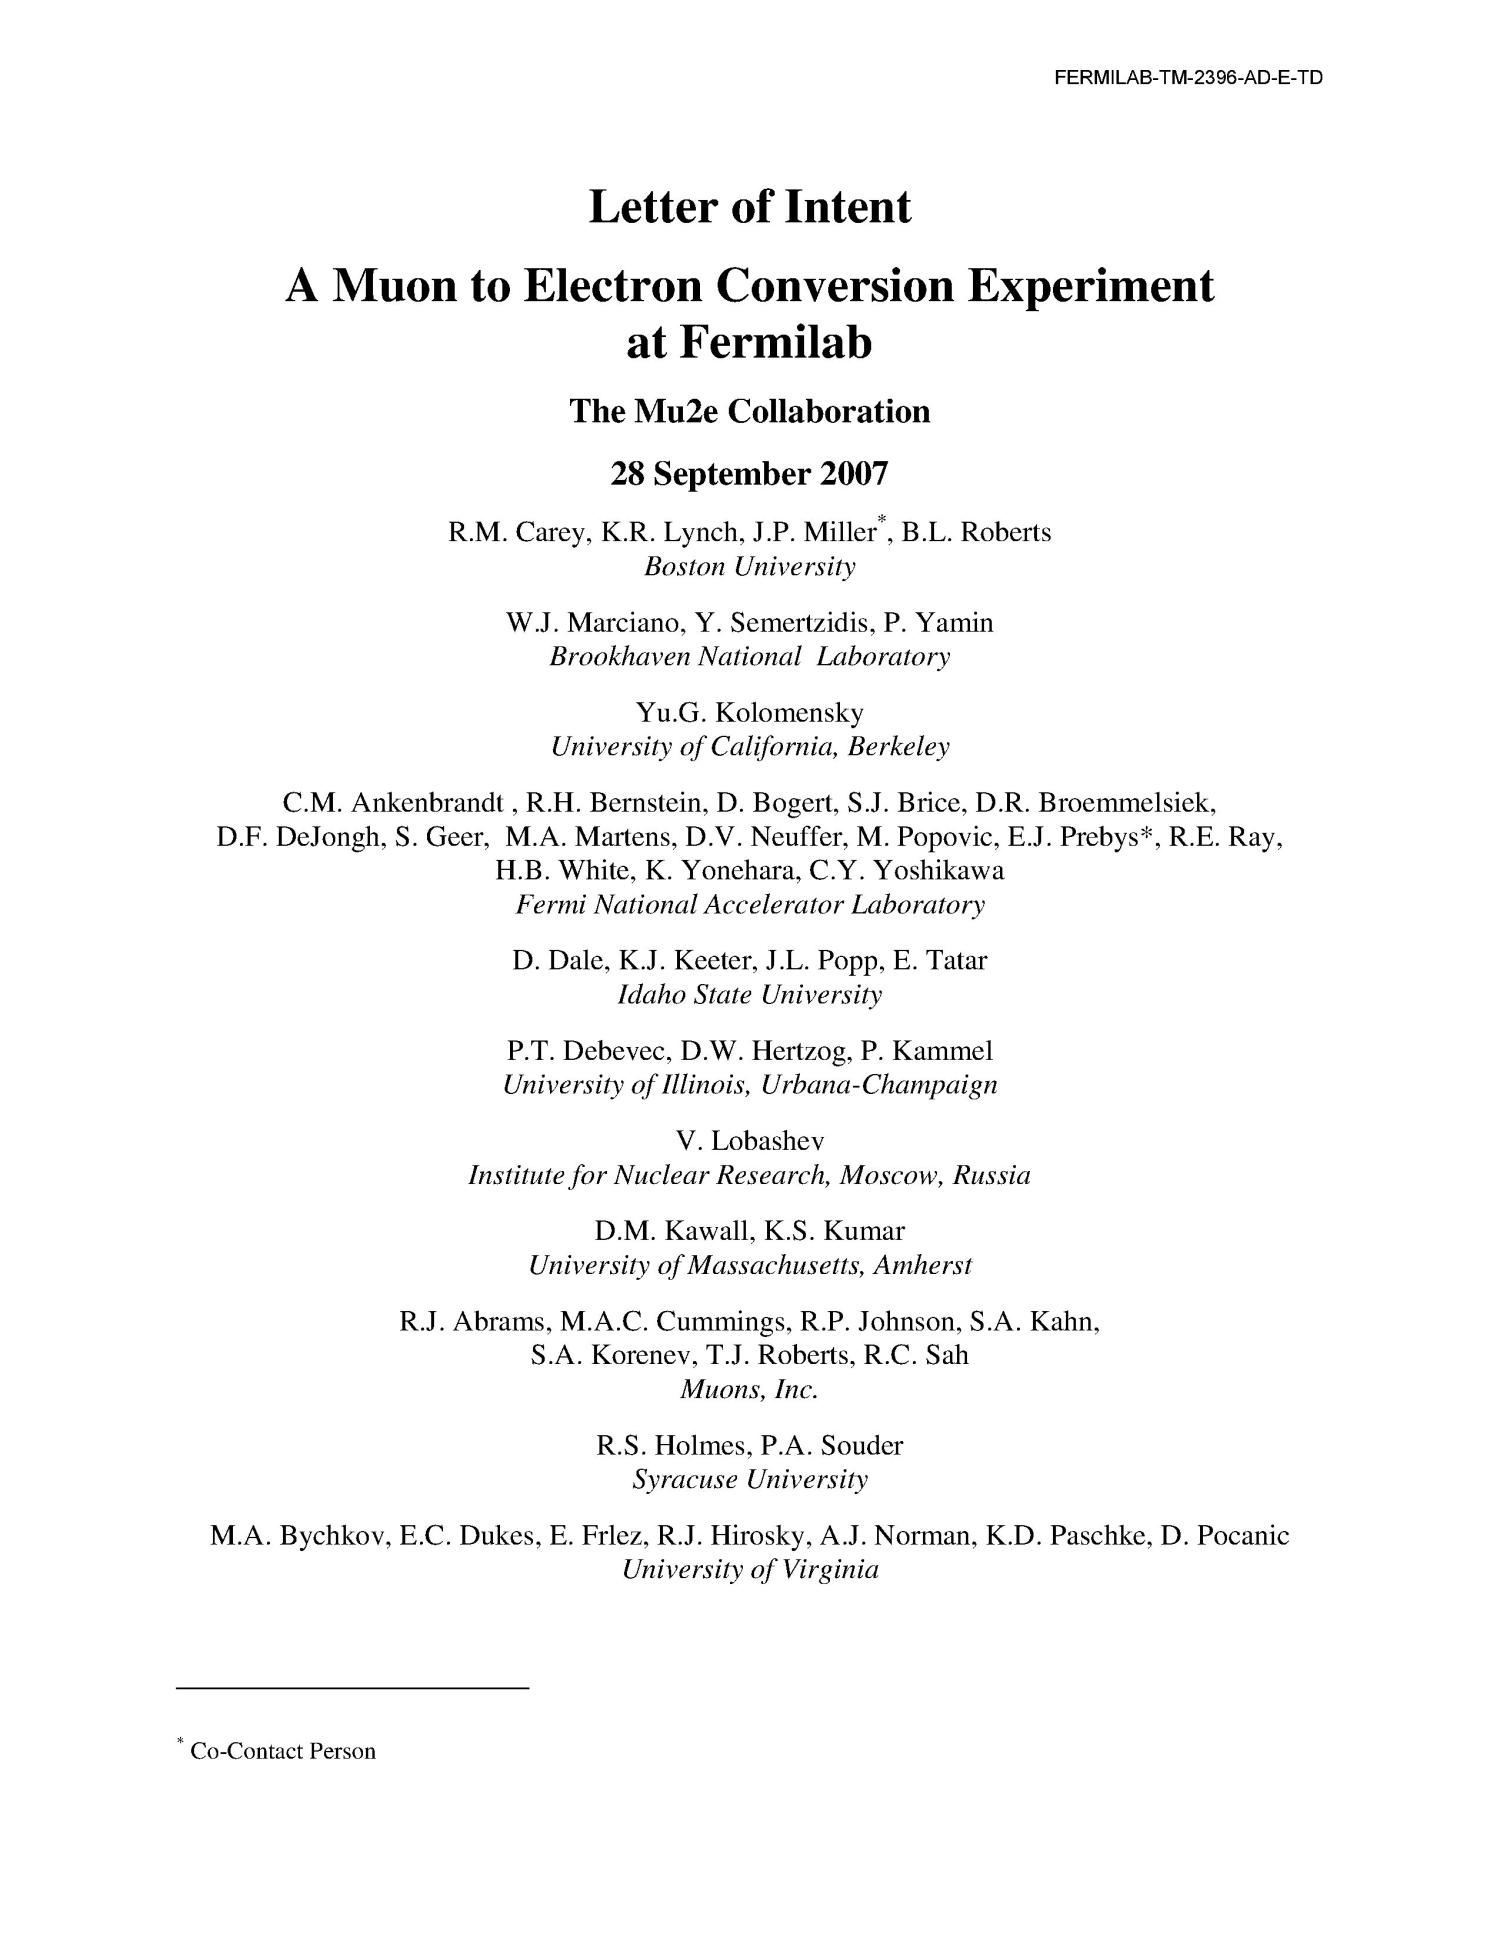 Letter Of Intent A Muon To Electron Conversion Experiment At Fermilab Page 1 Of 44 Unt Digital Library